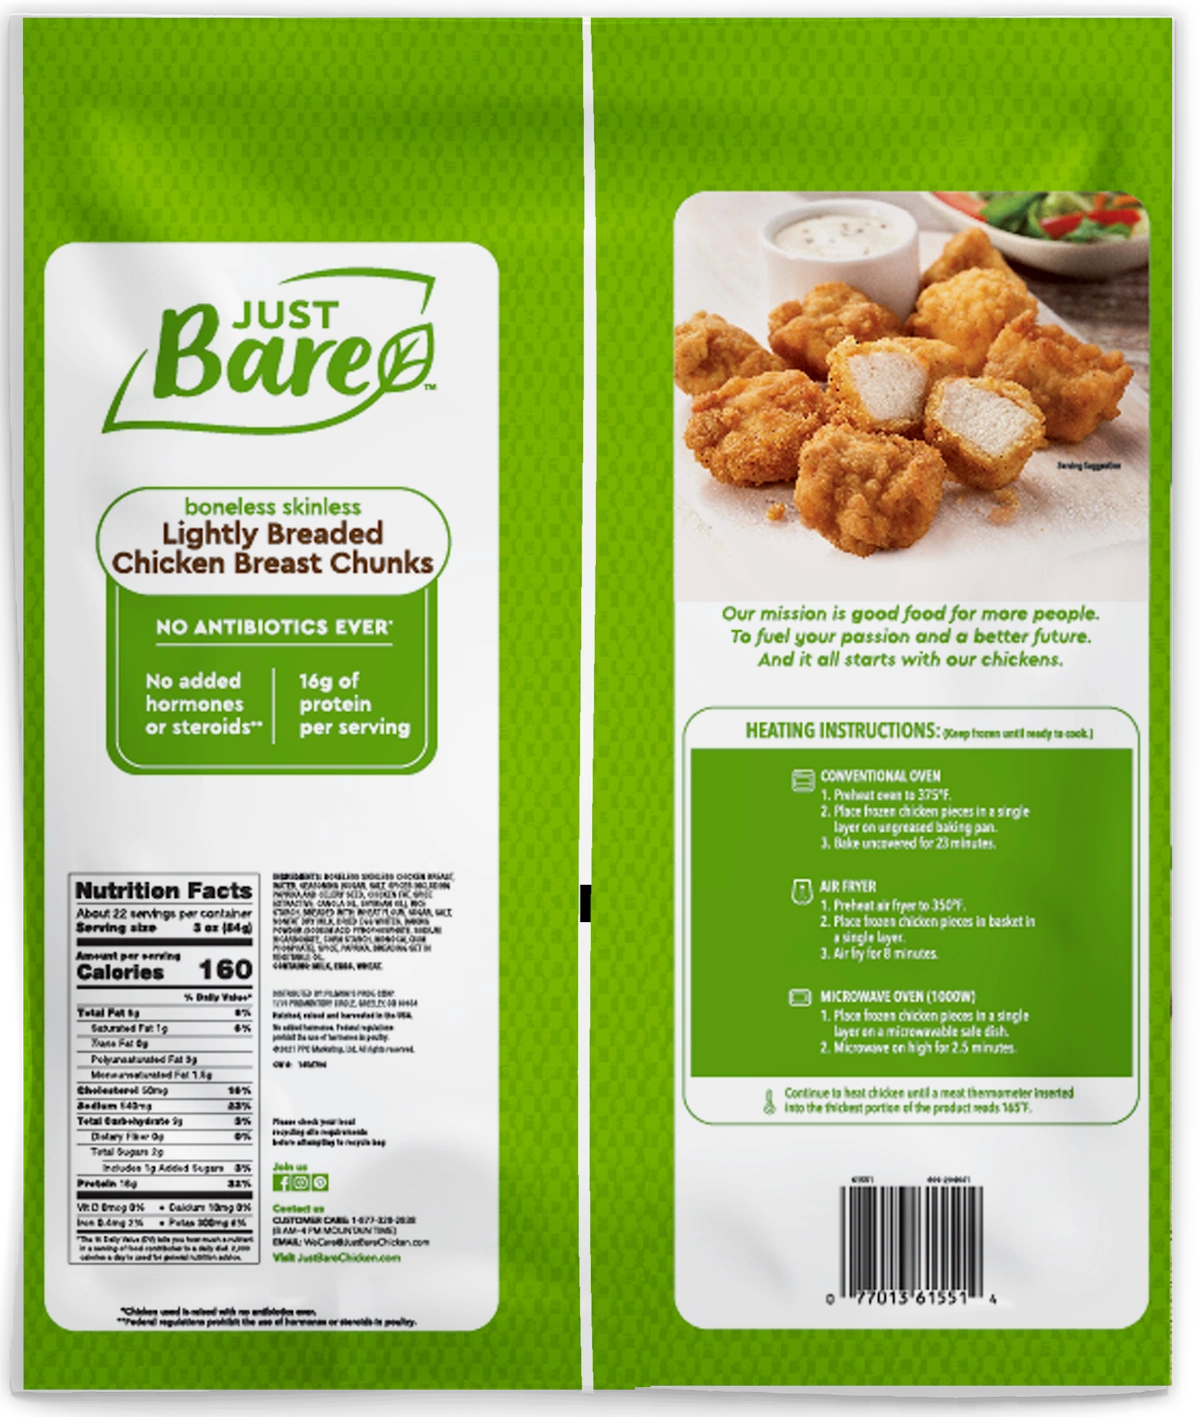 Lightly Breaded Spicy Chicken Breast Fillets - Just Bare Foods